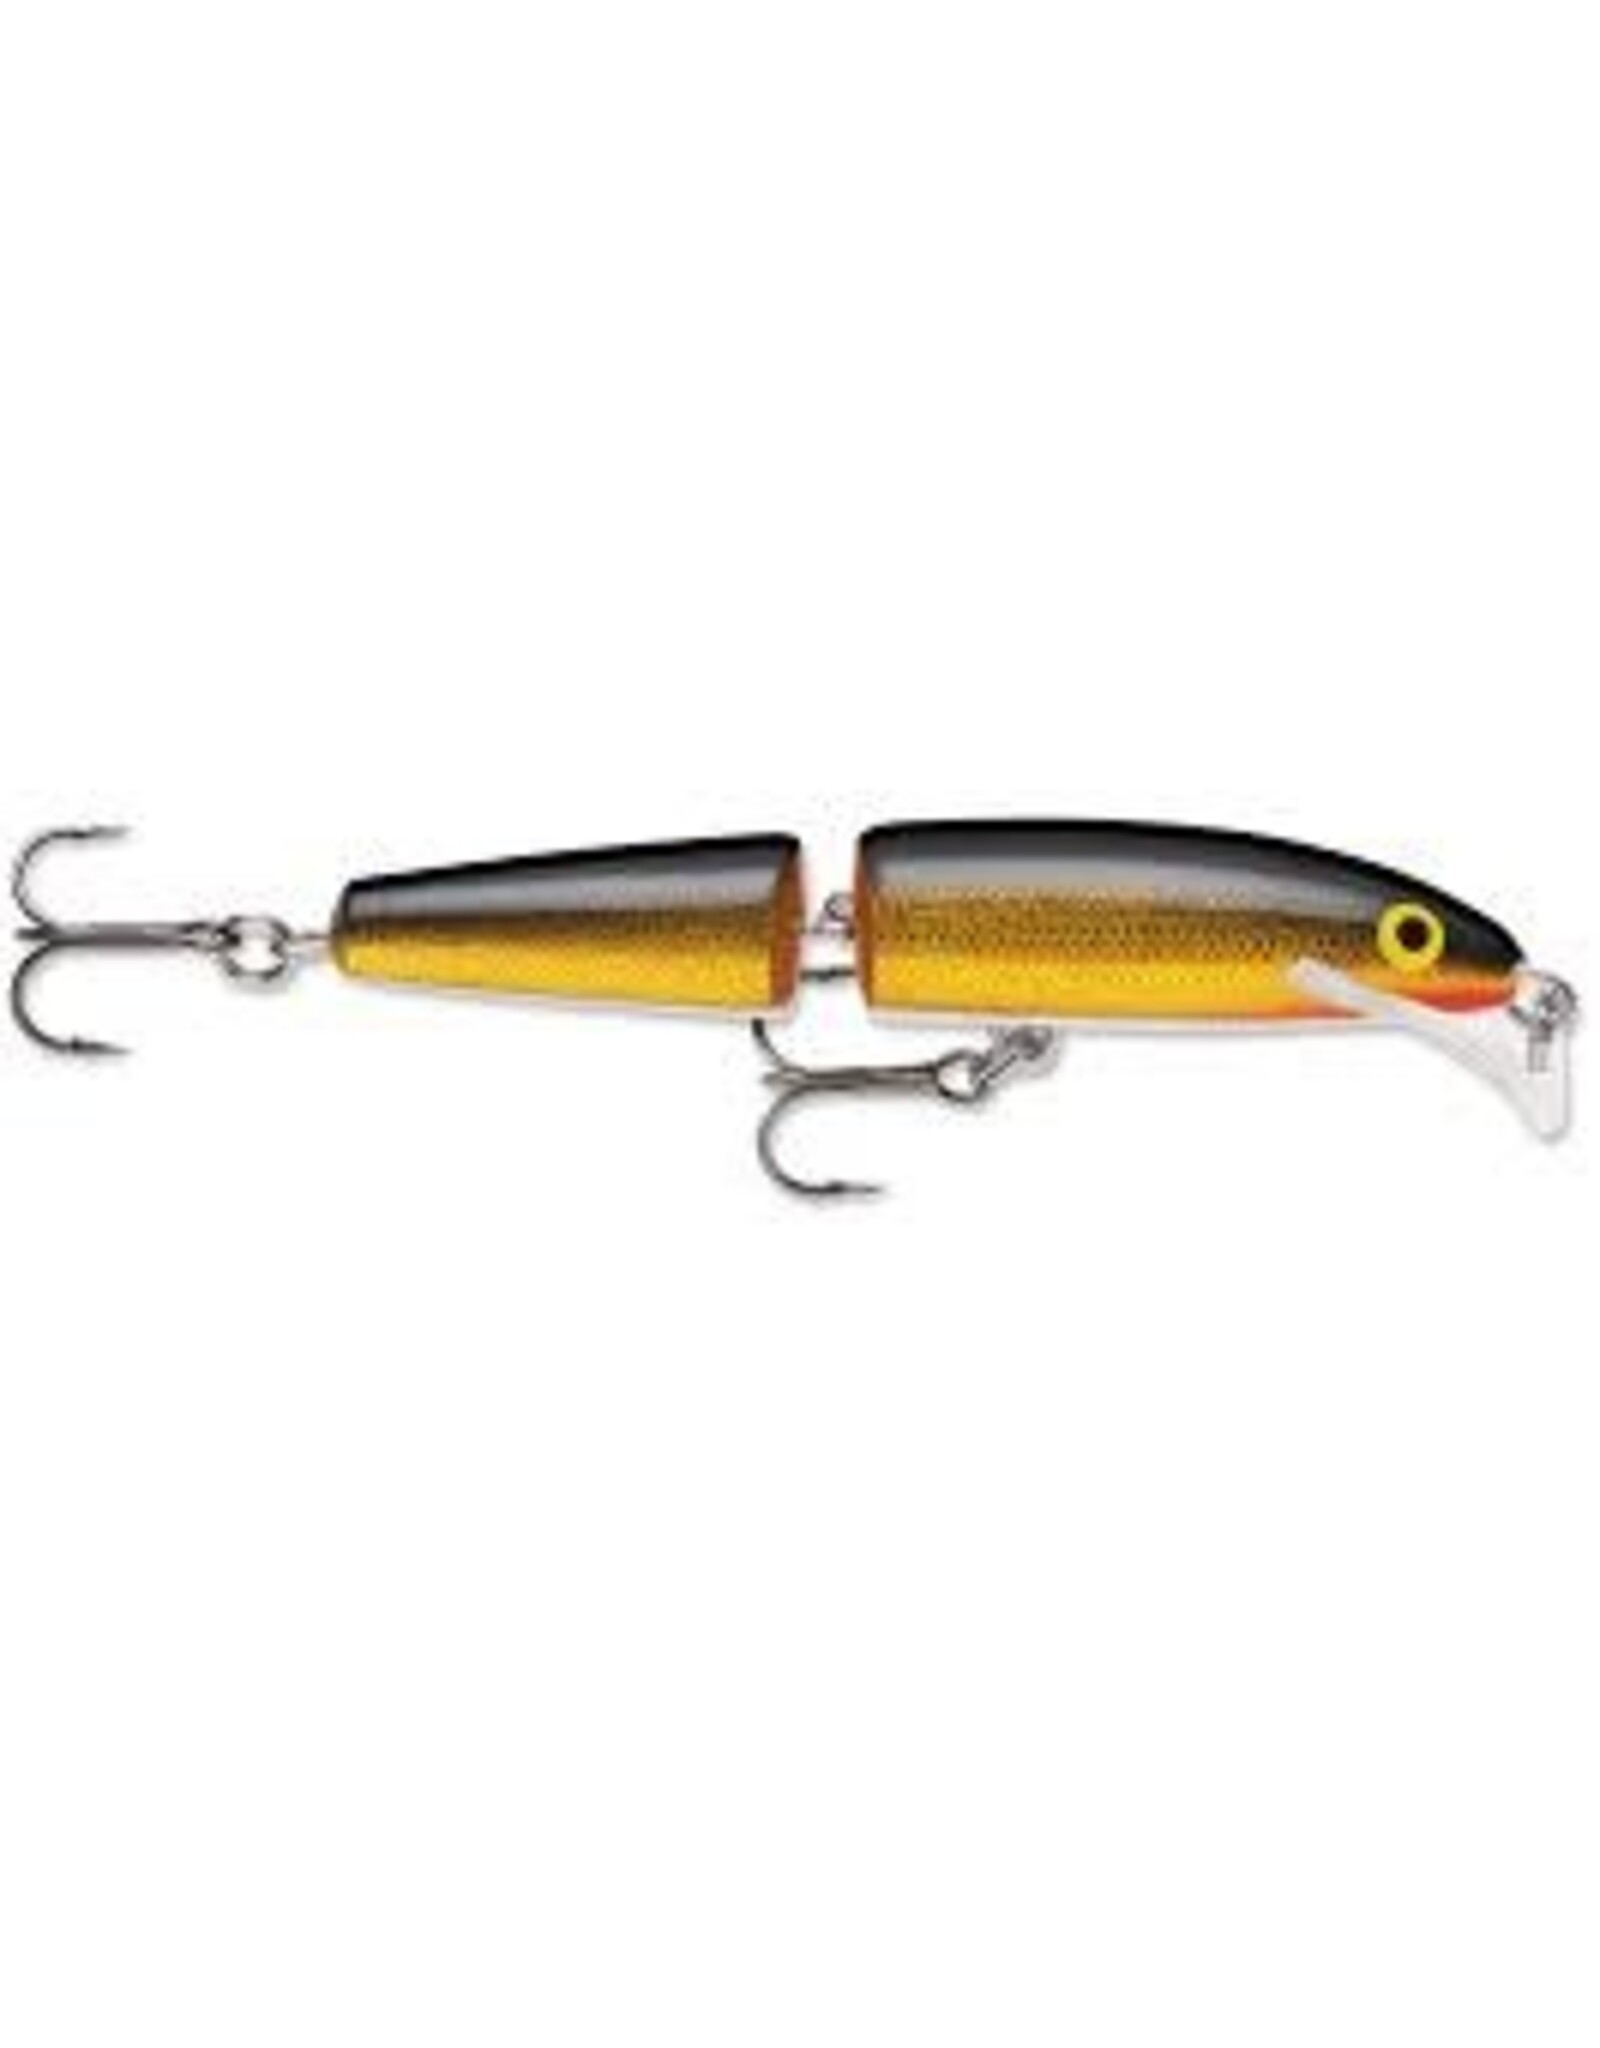 Rapala Rapala Scatter Rap Jointed Lure 3 1/2" 1/4 oz